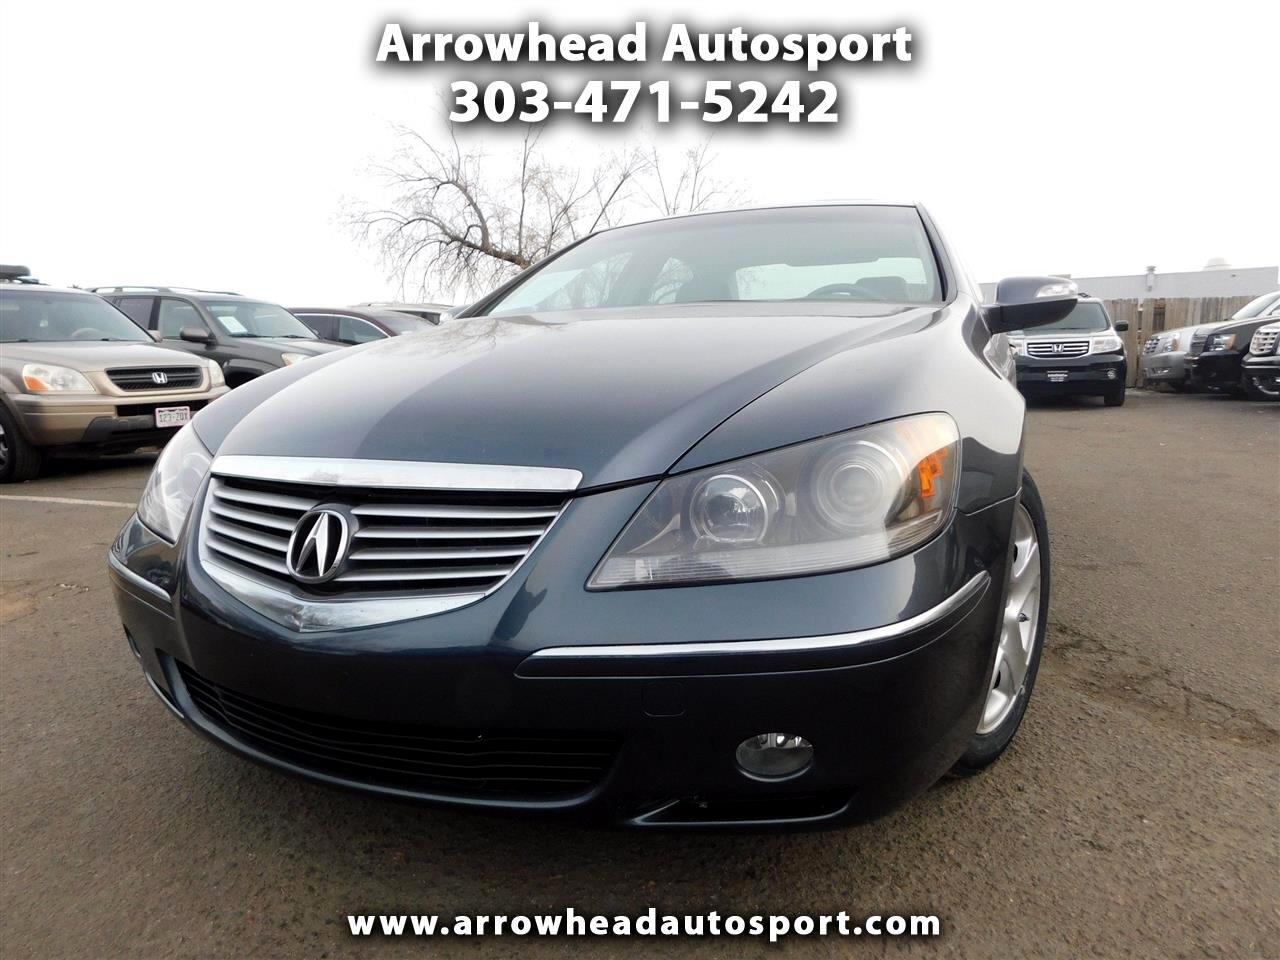 Used 2008 Acura Rl 4dr Sdn Tech Pkg Natl For Sale In Parker Co